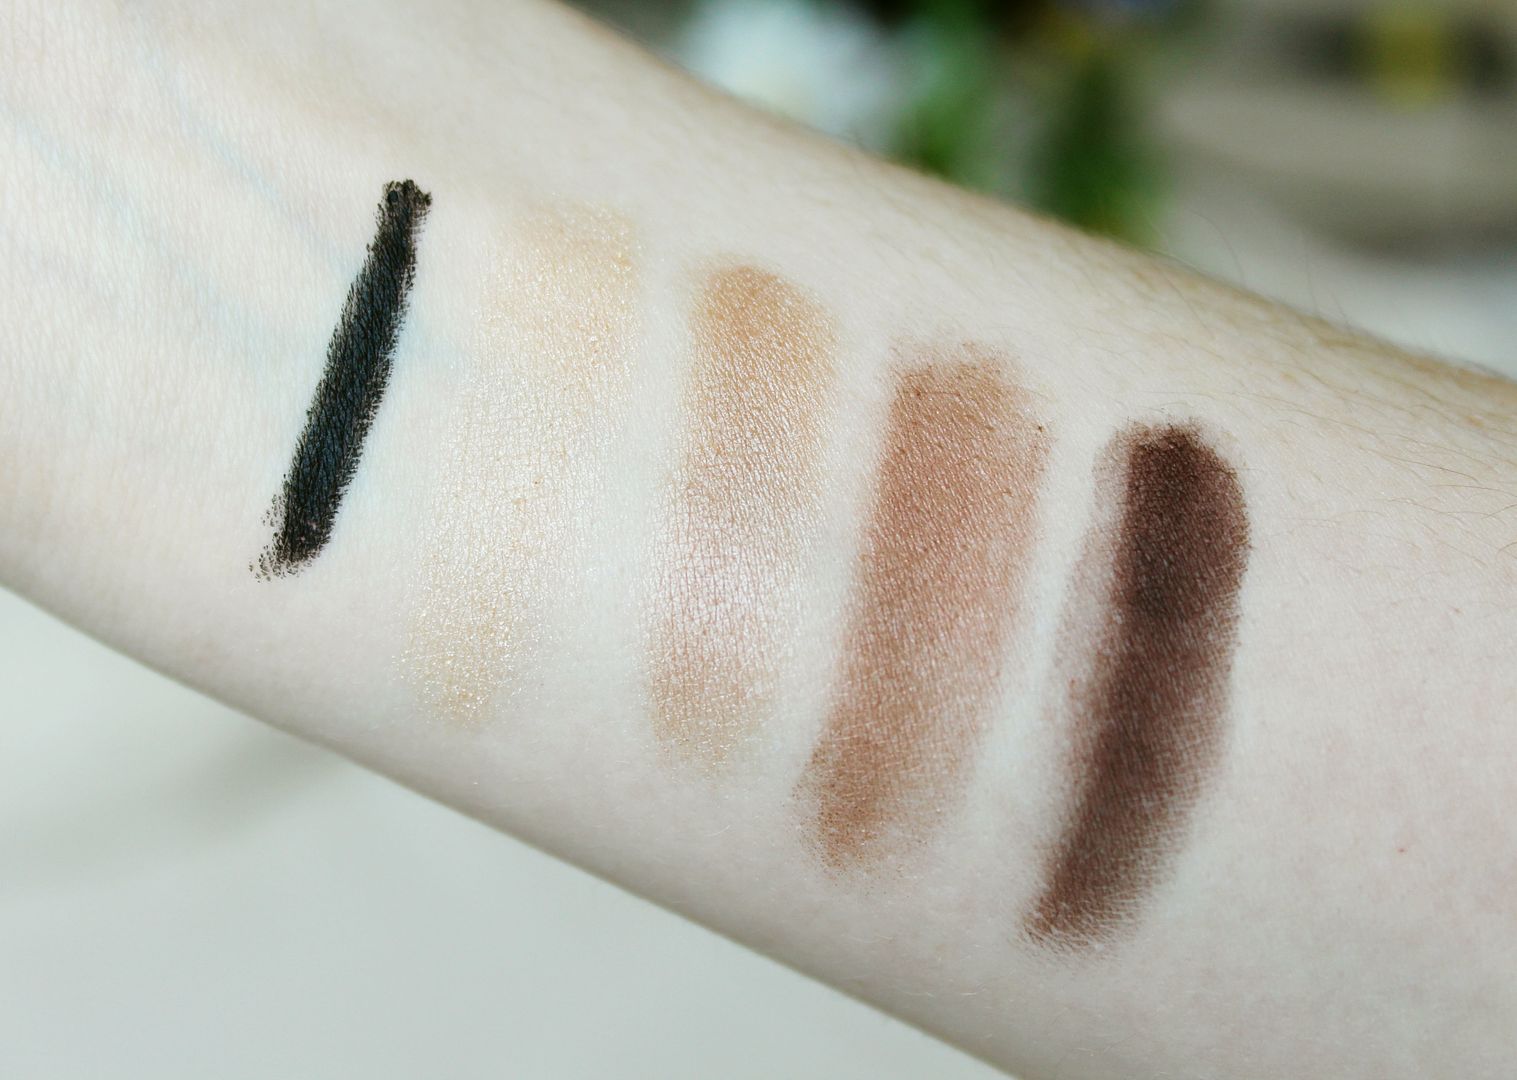 Yves-Rocher-Day-Time-Smokey-Eye-Review-Sumptuous-Colour-Eye-Shadow-Quad-Red-Hot-Brown-Kajal-Intense-100-Black-Swatch-Belle-Amie-UK-Beauty-Fashion-Lifestyle-Blog